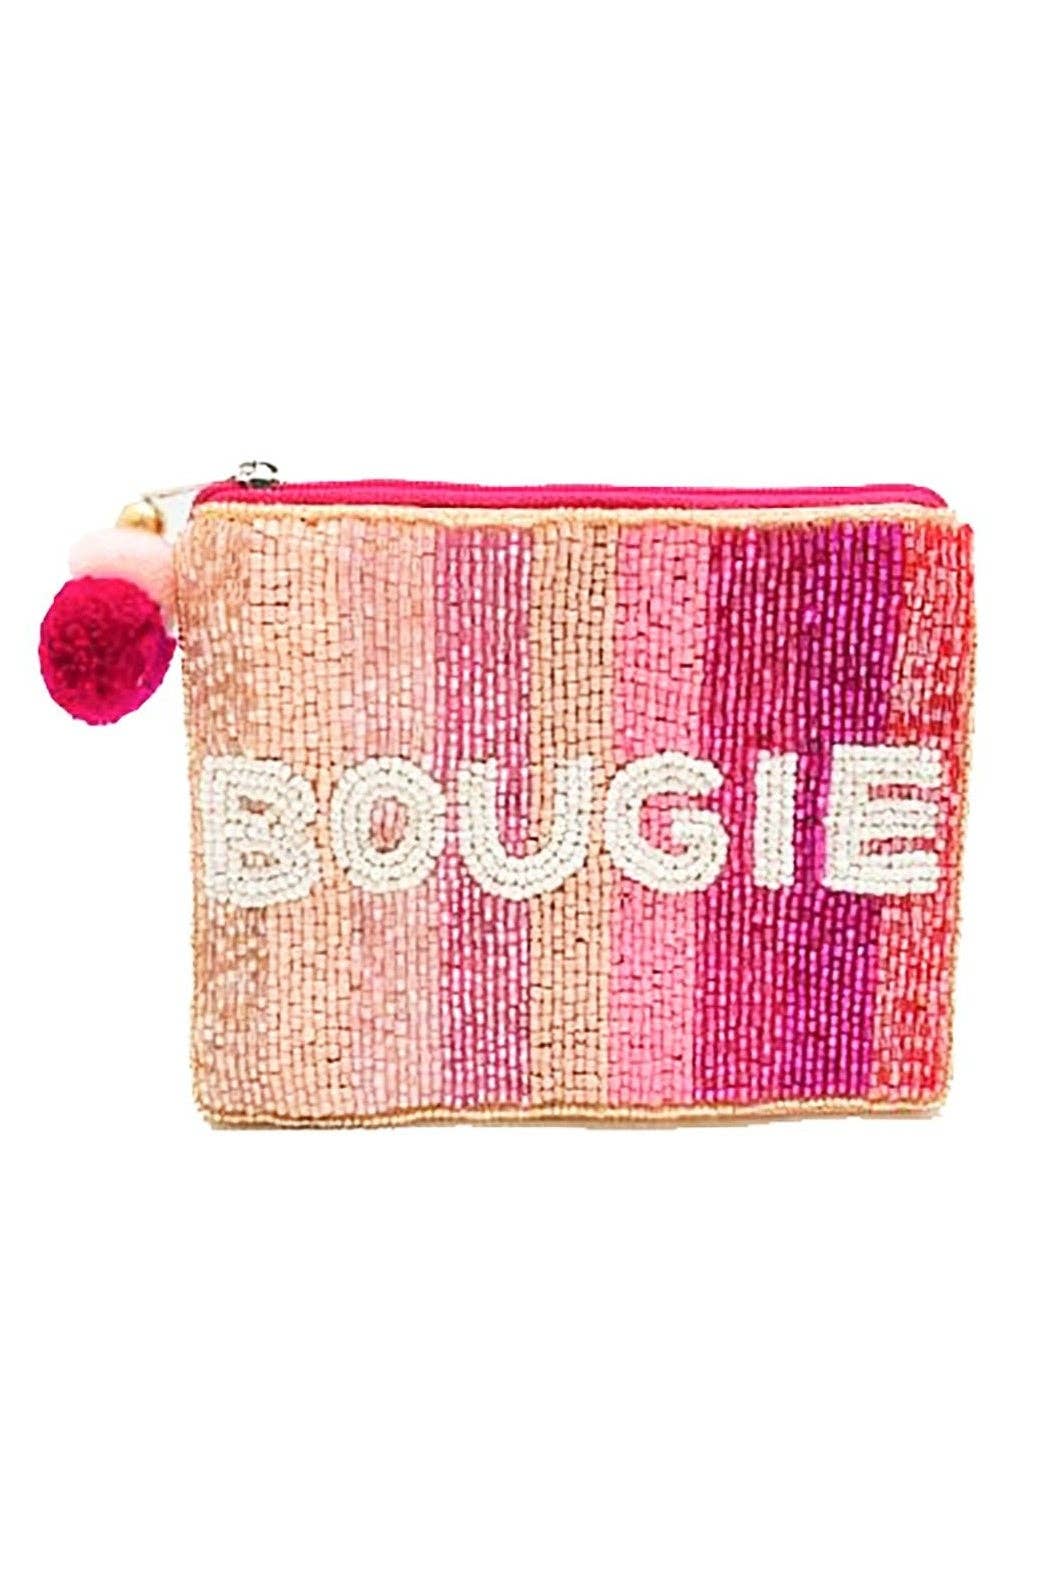 Embellish Your Life - Bougie Beaded Pouch Bag